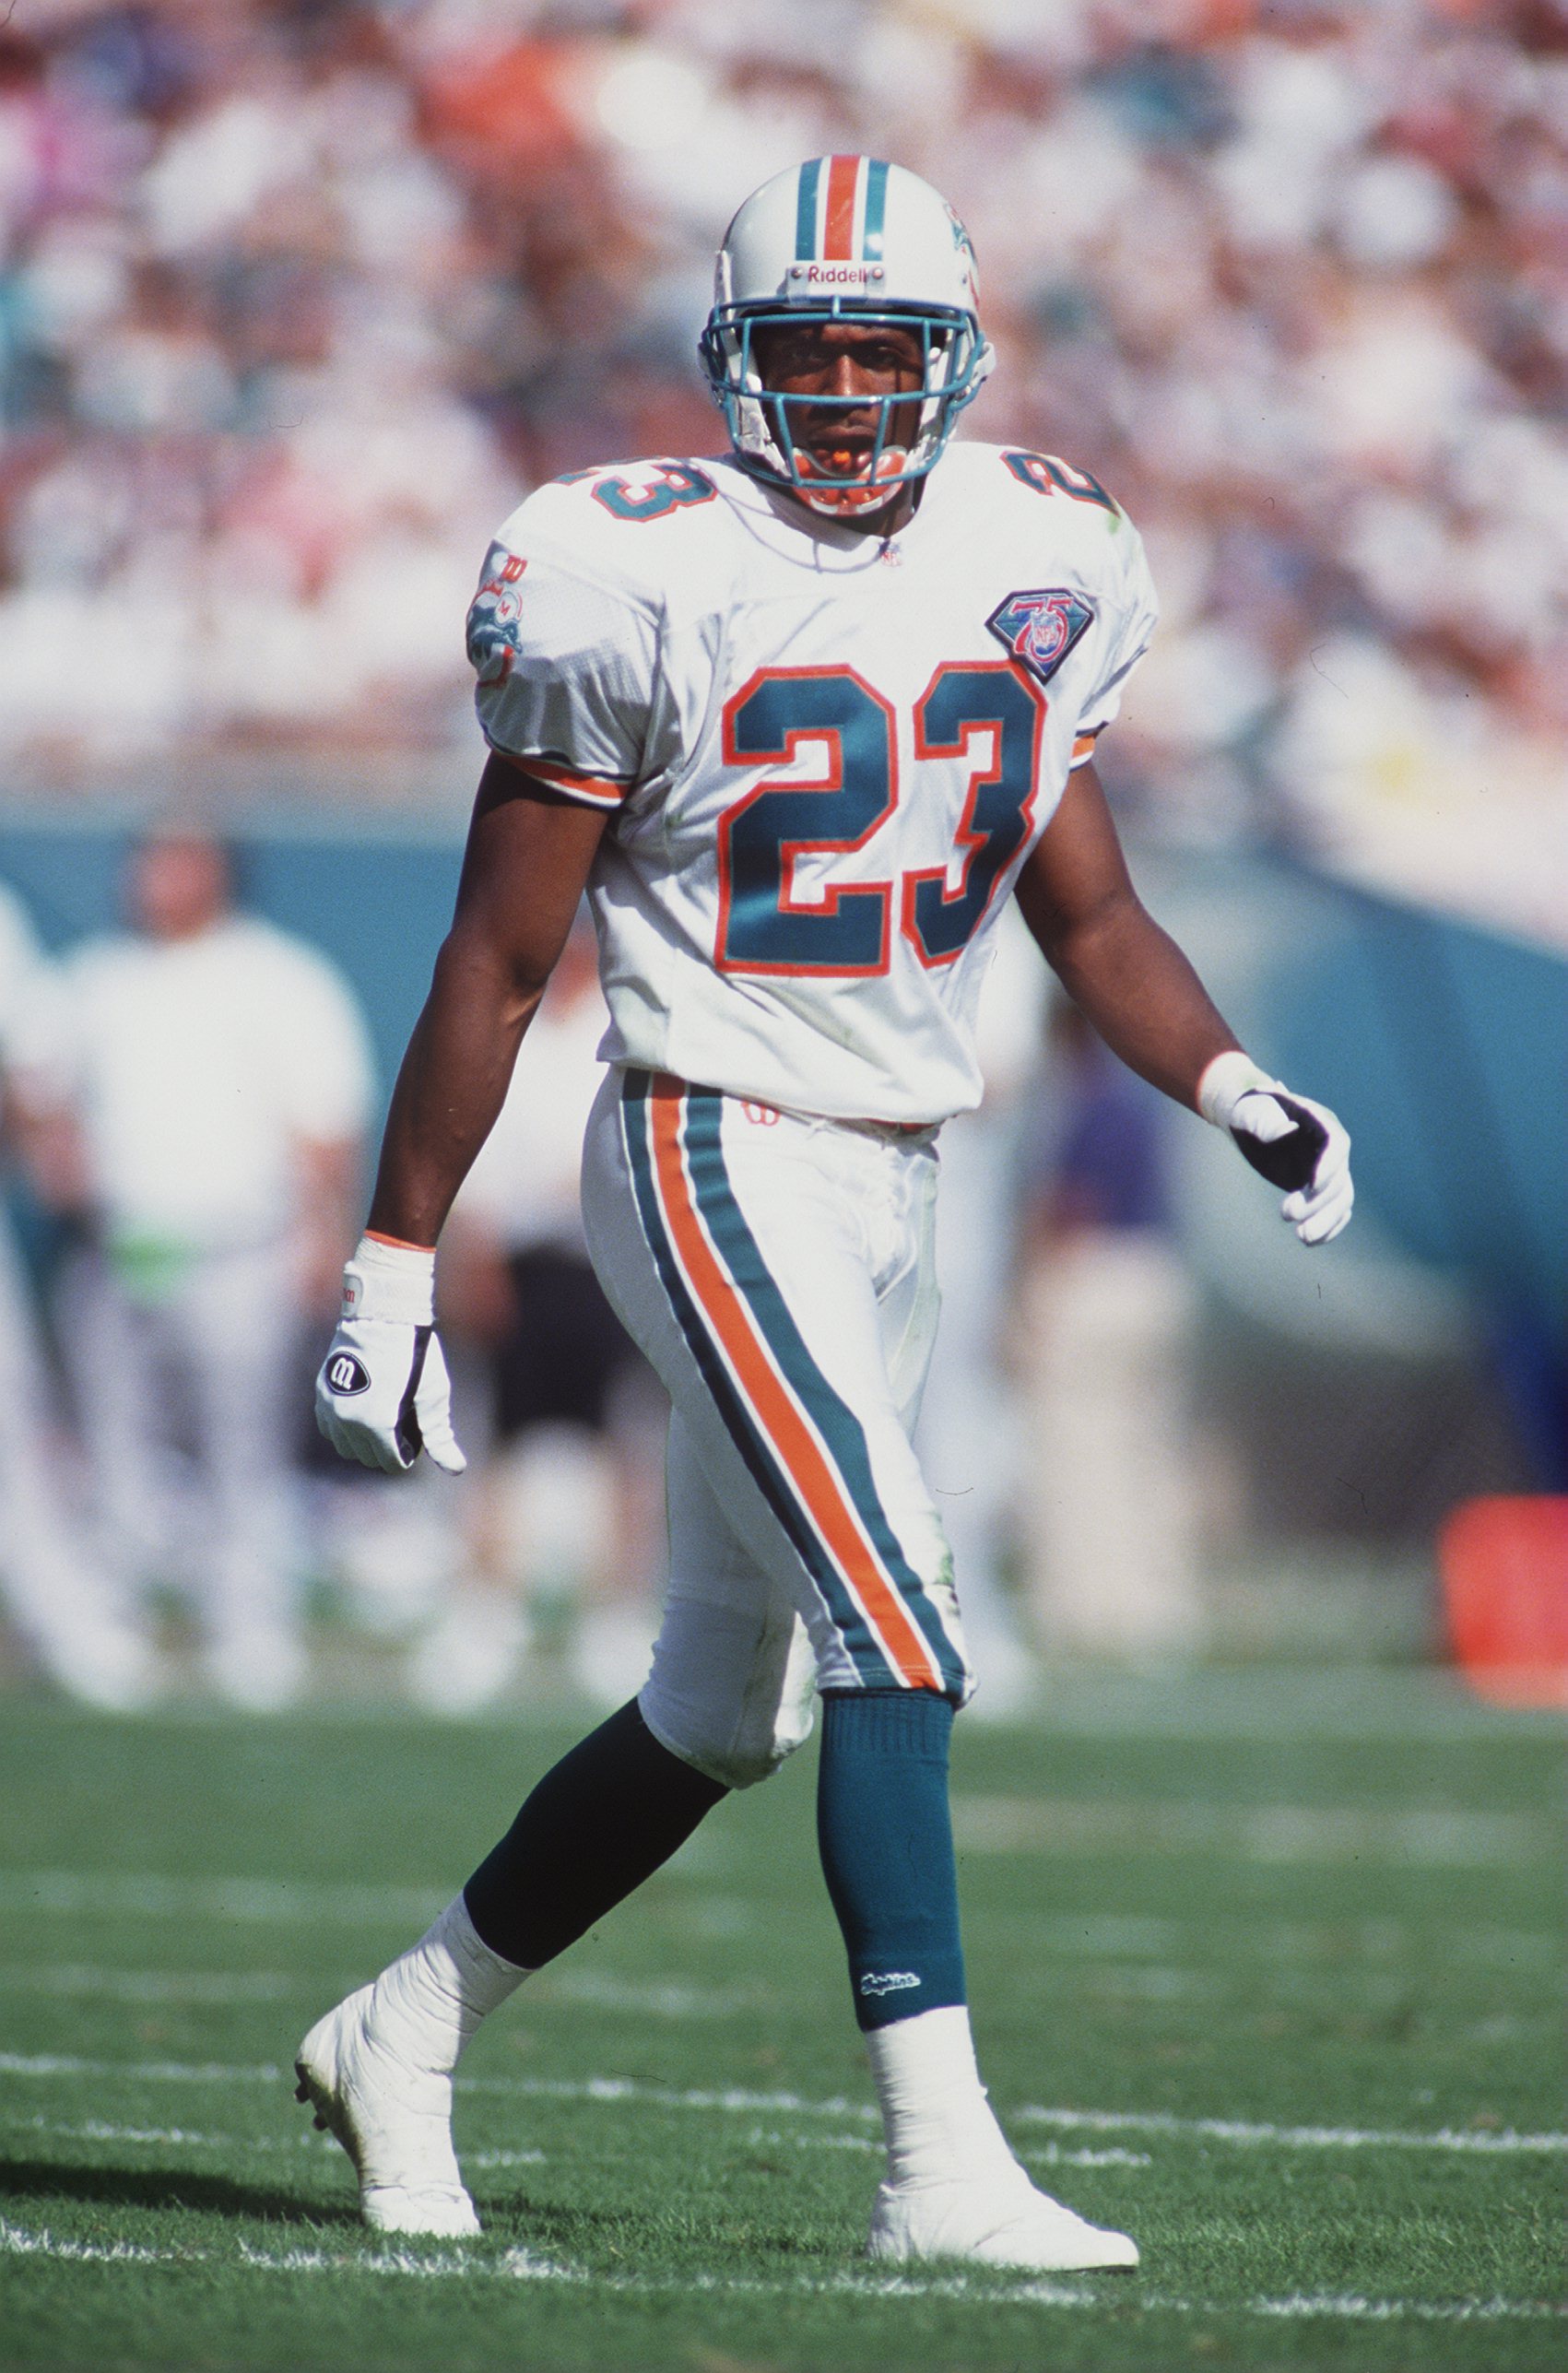 16 OCT 1994:  CORNERBACK TROY VINCENT OF THE MIAMI DOLPHINS ON THE FIELD DURING A 20-17 OVERTIME WIN OVER THE LOS ANGELES RADIERS AT JOE ROBBIE STADIUM IN MIAMI, FLOIRIDA. Mandatory Credit: Scott Halleran/ALLSPORT